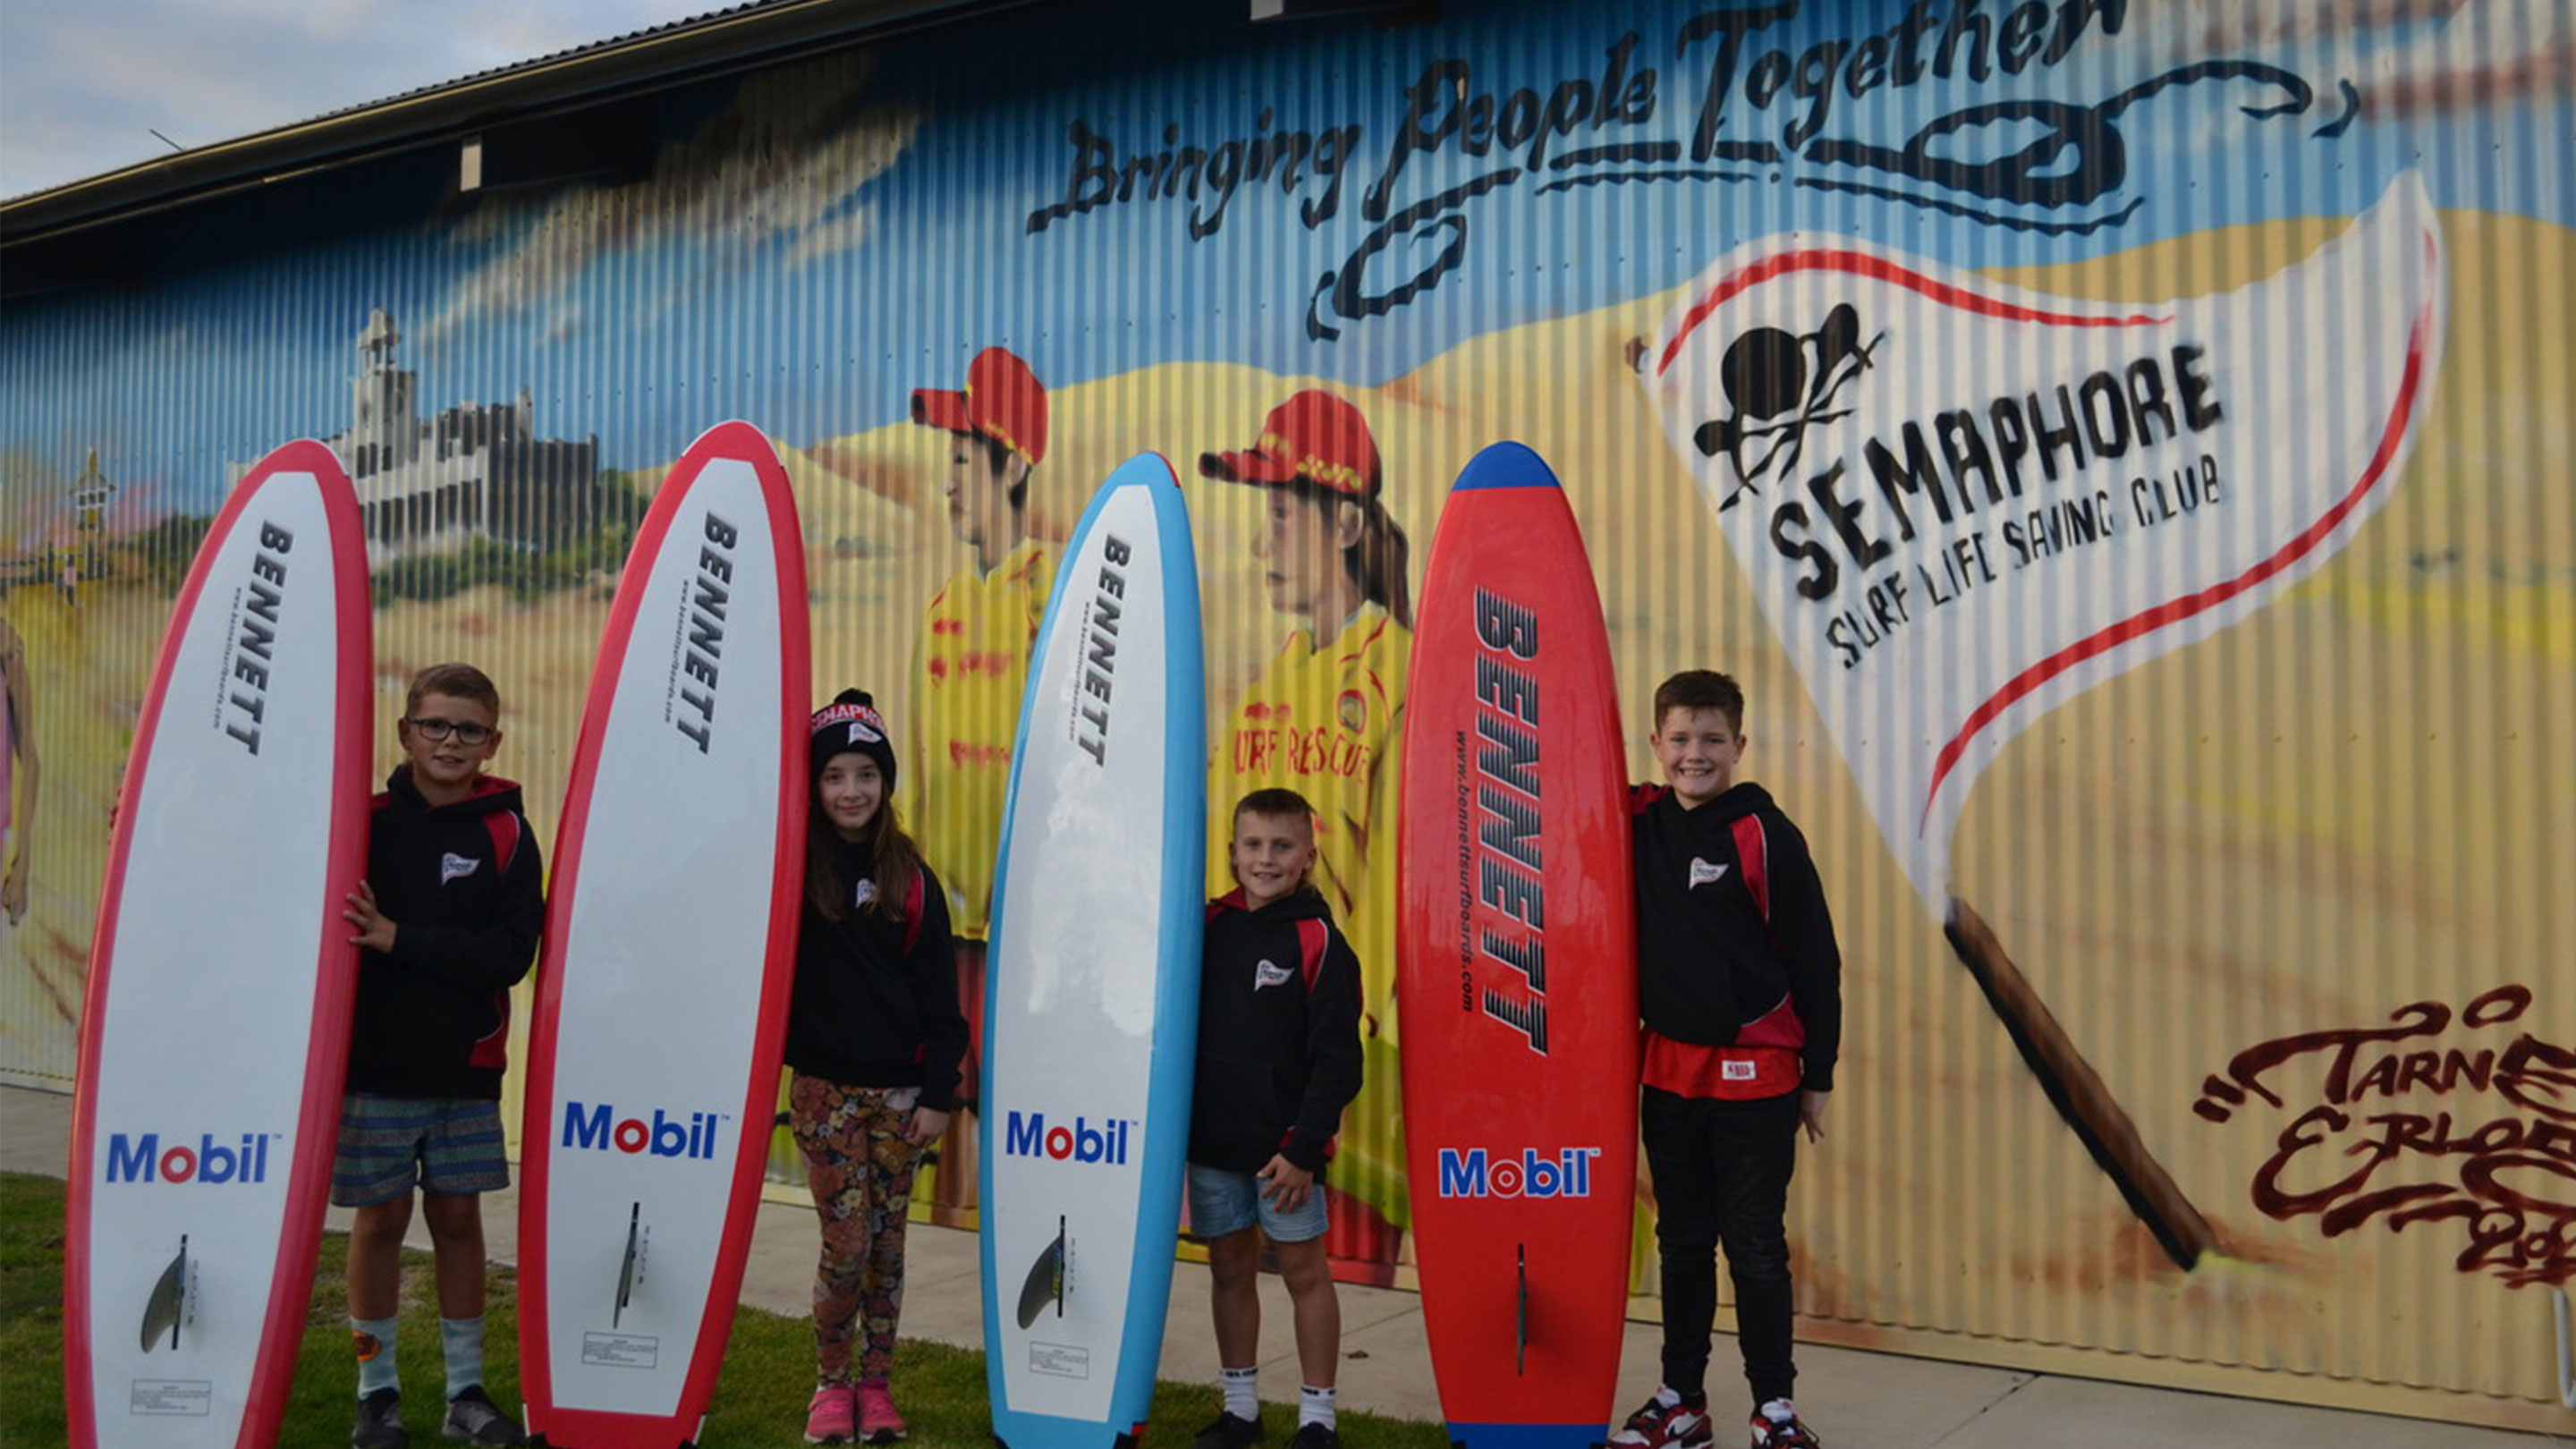 Encouraging the important work of South Australian surf clubs